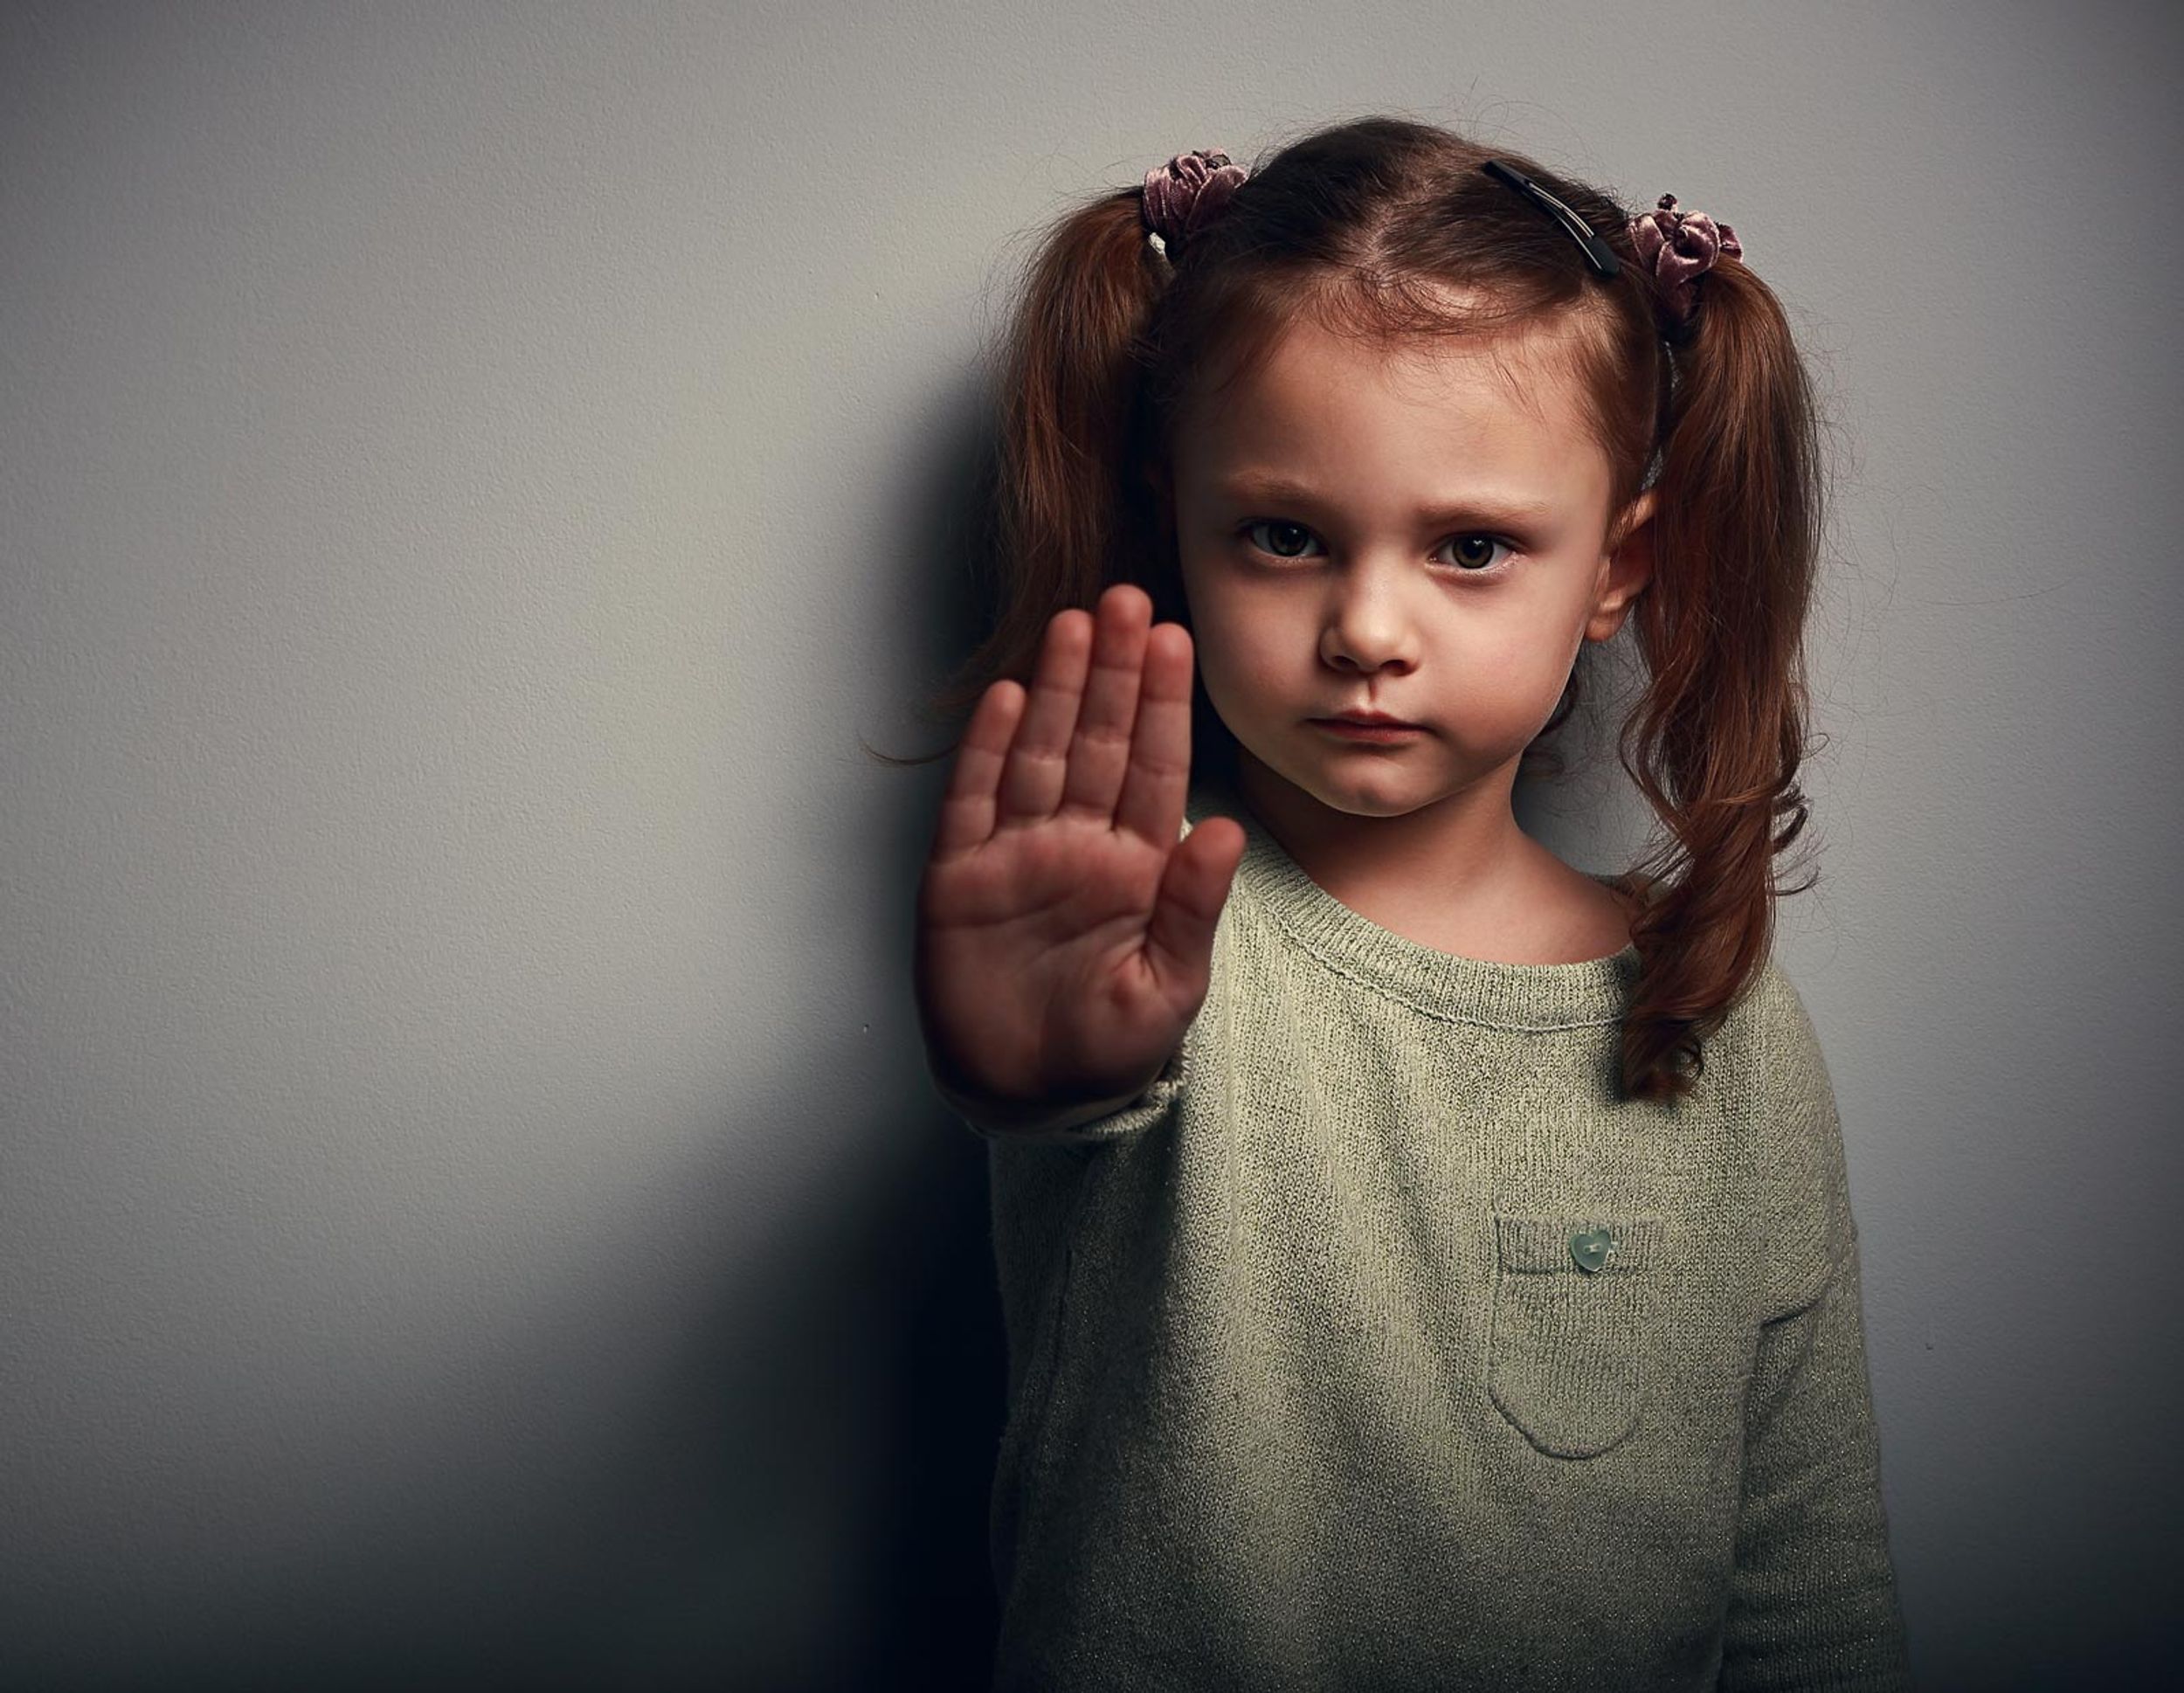 Bystander Effect: Where's The Line Between Discipline And Child Abuse?